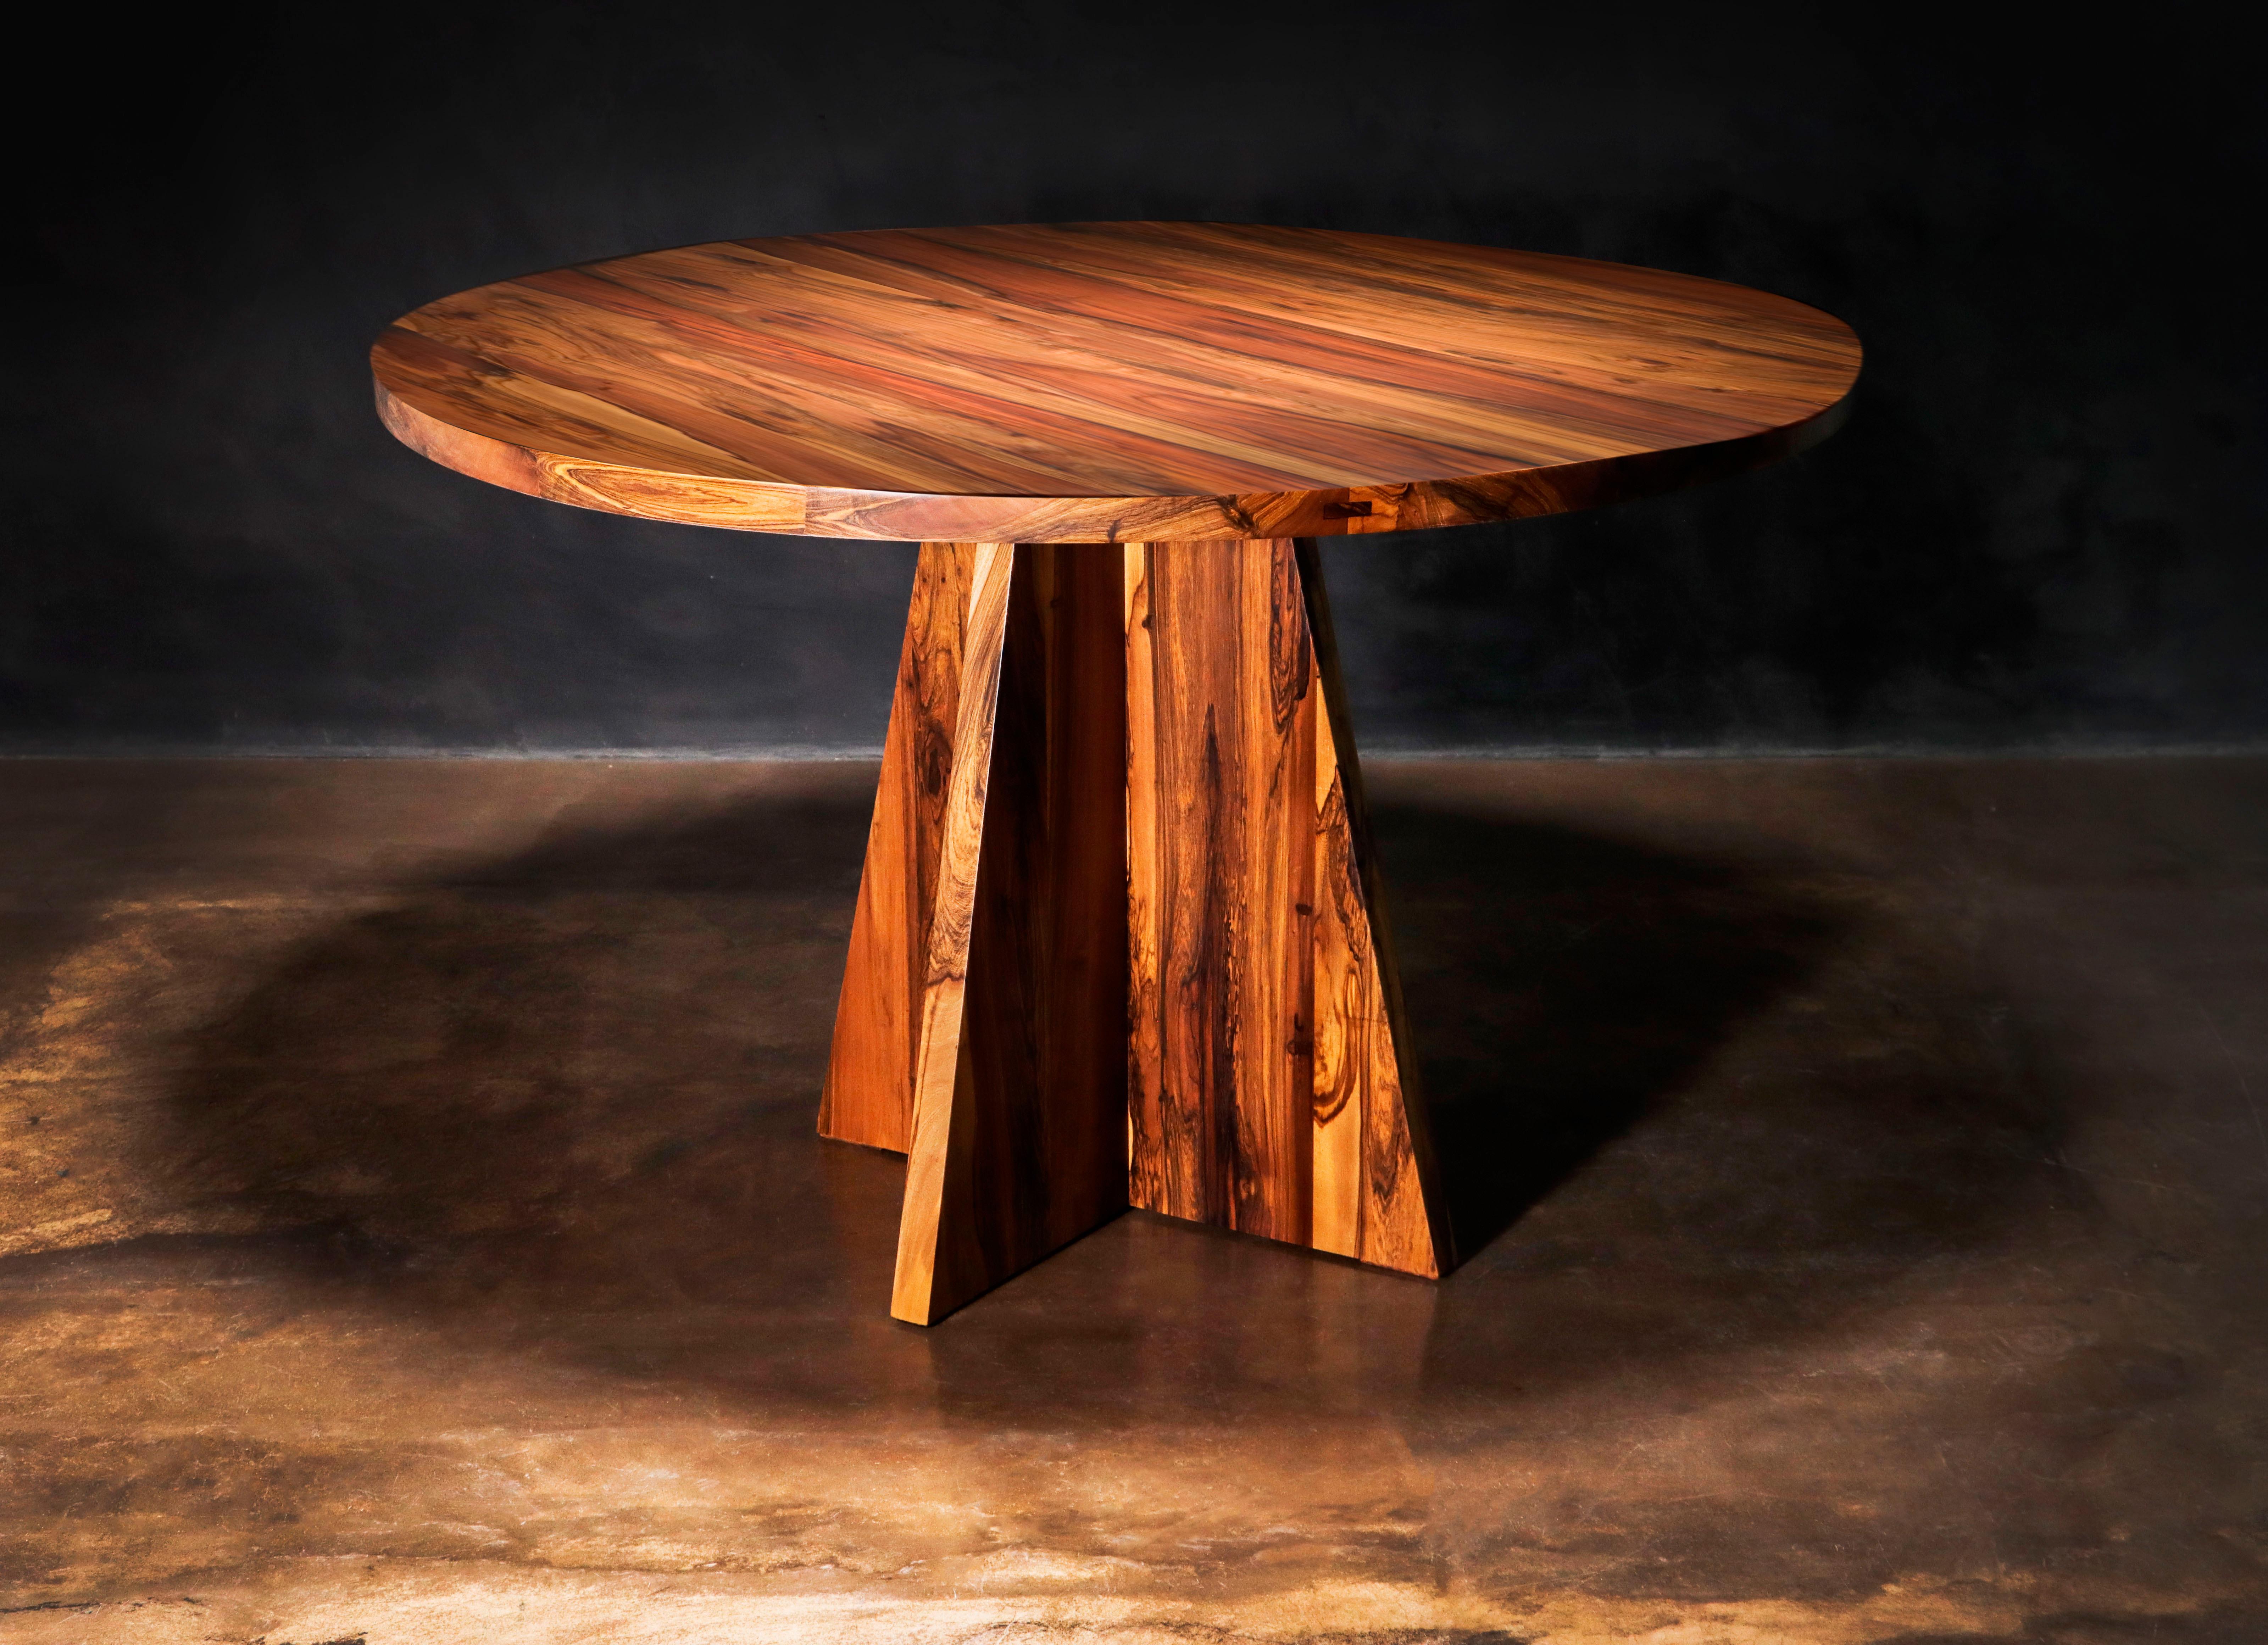 Luca Single Pedestal Solid Argentine Rosewood Round Table by Costantini

Measurments are 60